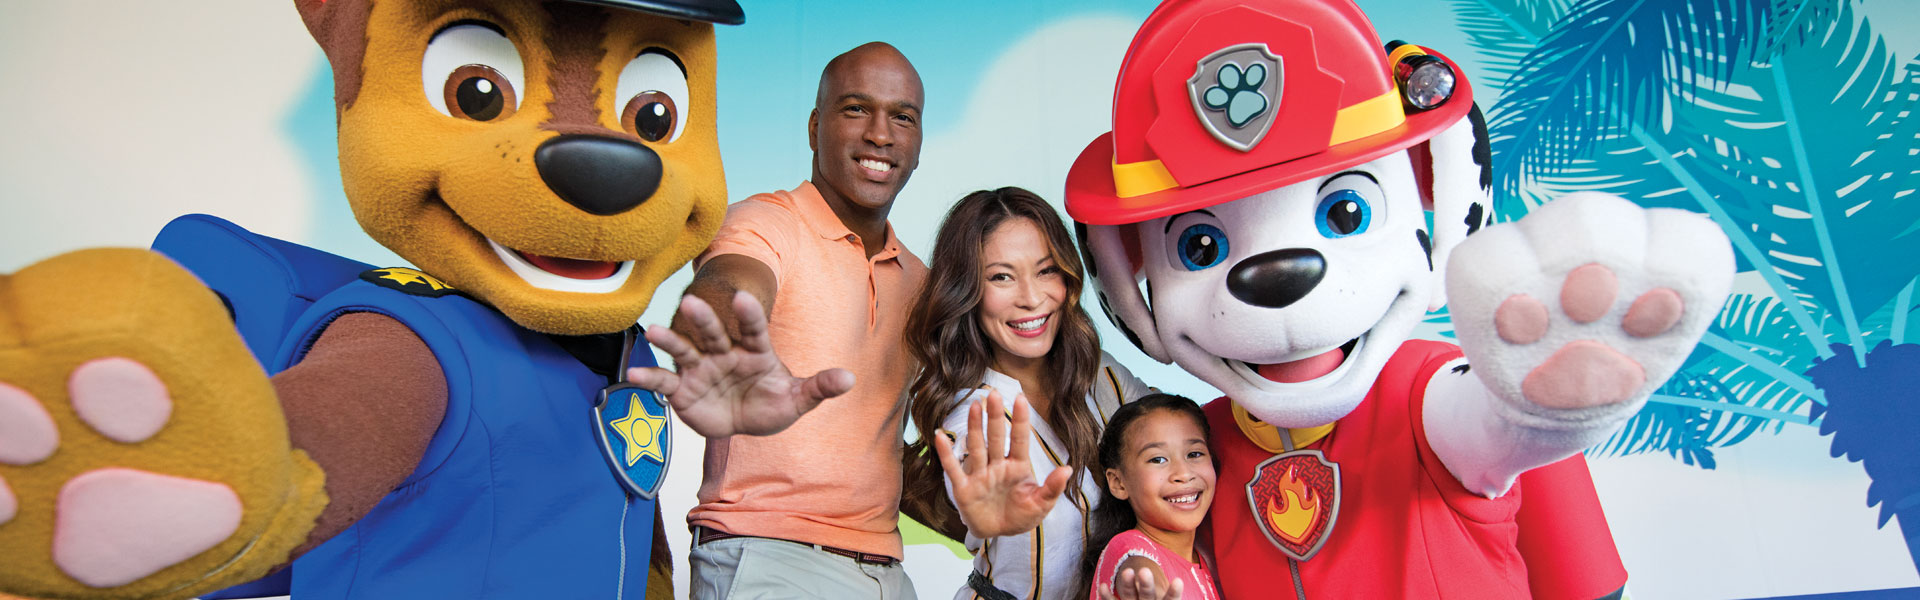 Family posing with Chase and Marshall of PAW Patrol